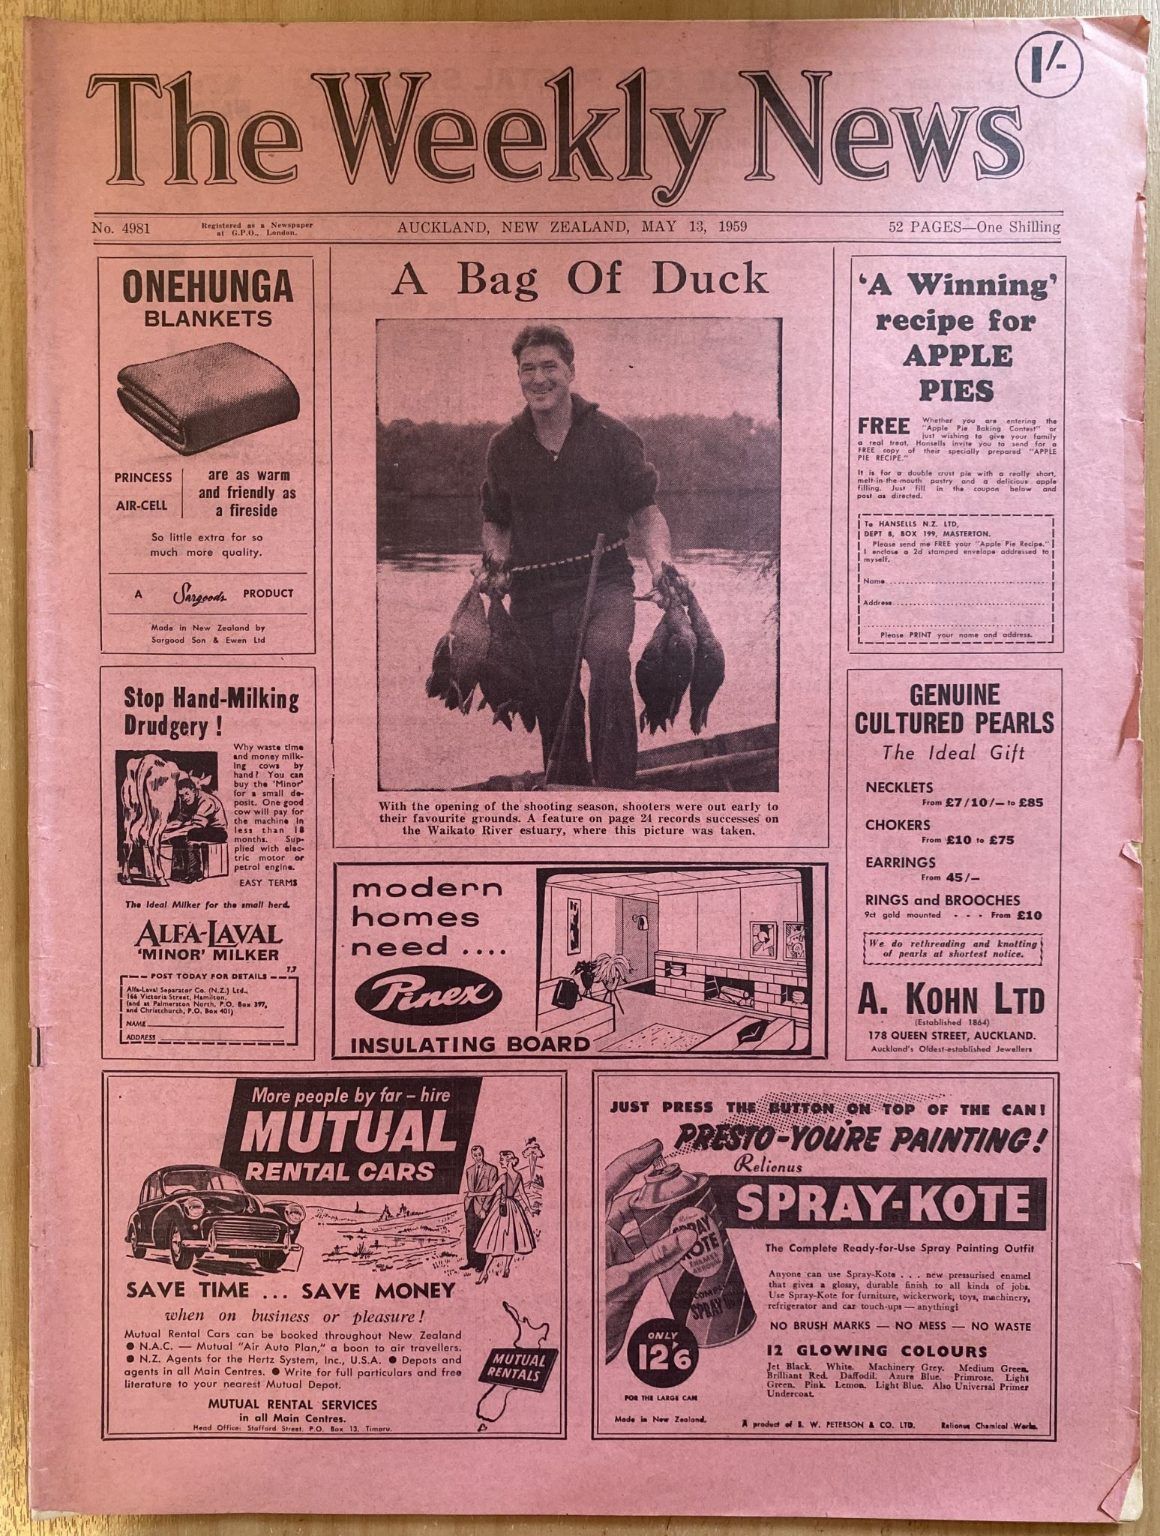 OLD NEWSPAPER: The Weekly News - No. 4981, 13 May 1959